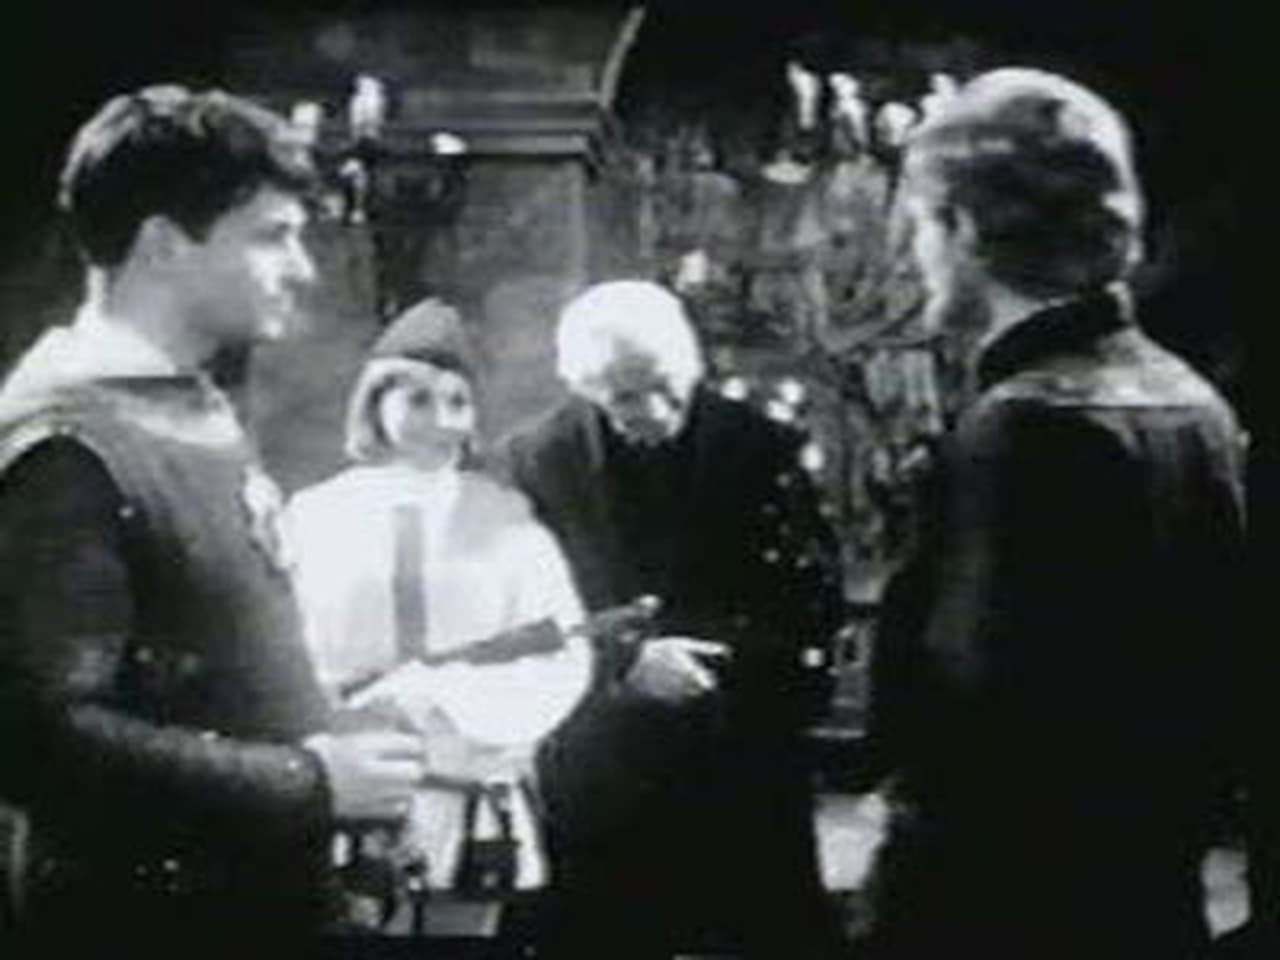 Doctor Who - Season 2 Episode 23 : The Knight of Jaffa